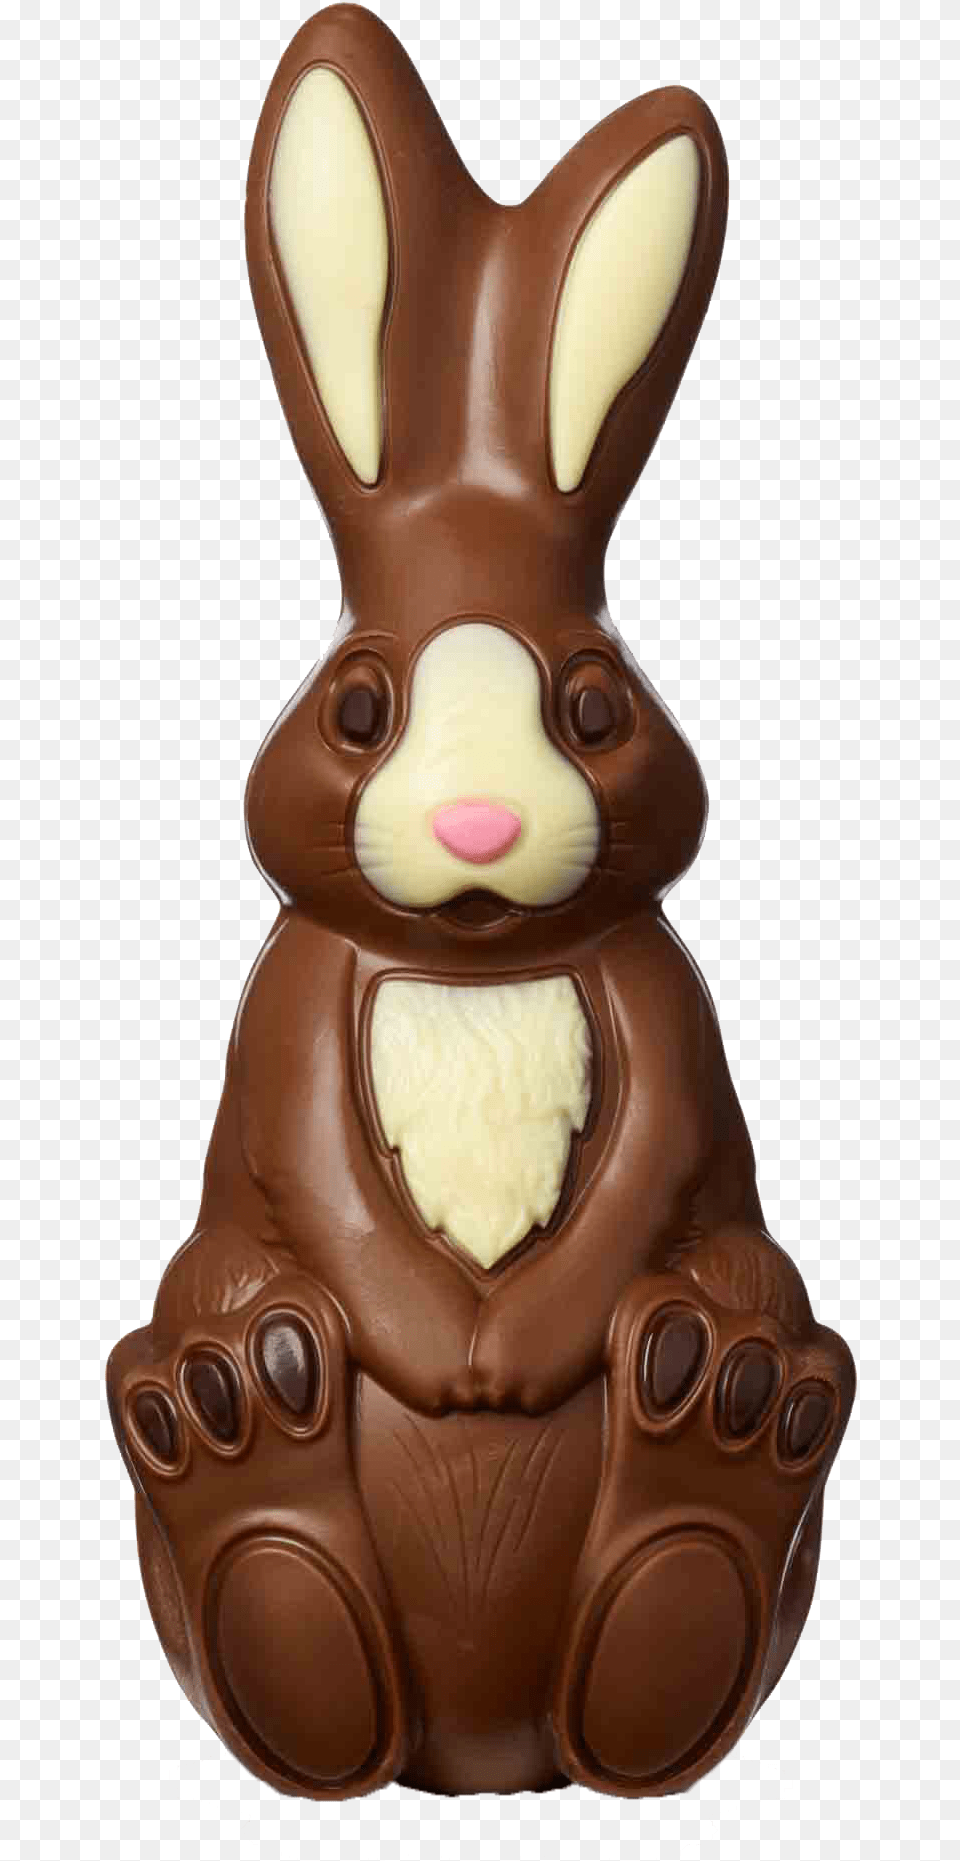 Chocolate Bunny Photo Chocolate Easter Bunny, Dessert, Food, Sweets Free Png Download